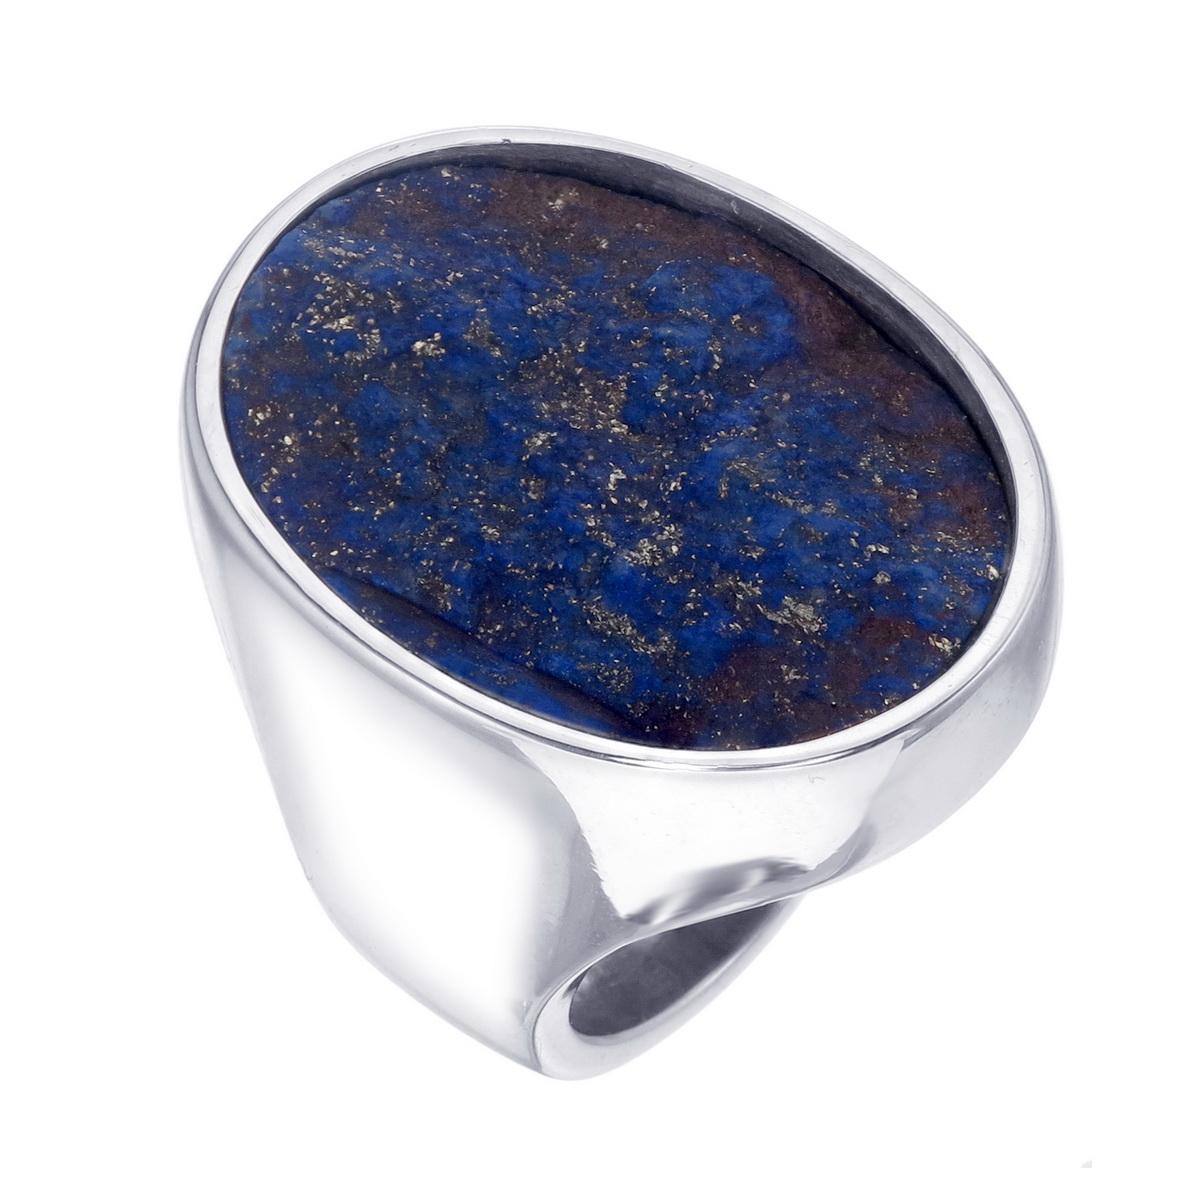 Orloff of Denmark; 41 carat Lapis Lazuli Sculpture ring fashioned out of 925 Sterling Silver.

From our latest collection based solely on the beautiful Lapis Lazuli.
This piece features a gorgeous 41 carat, oval cut lapis lazuli which has been